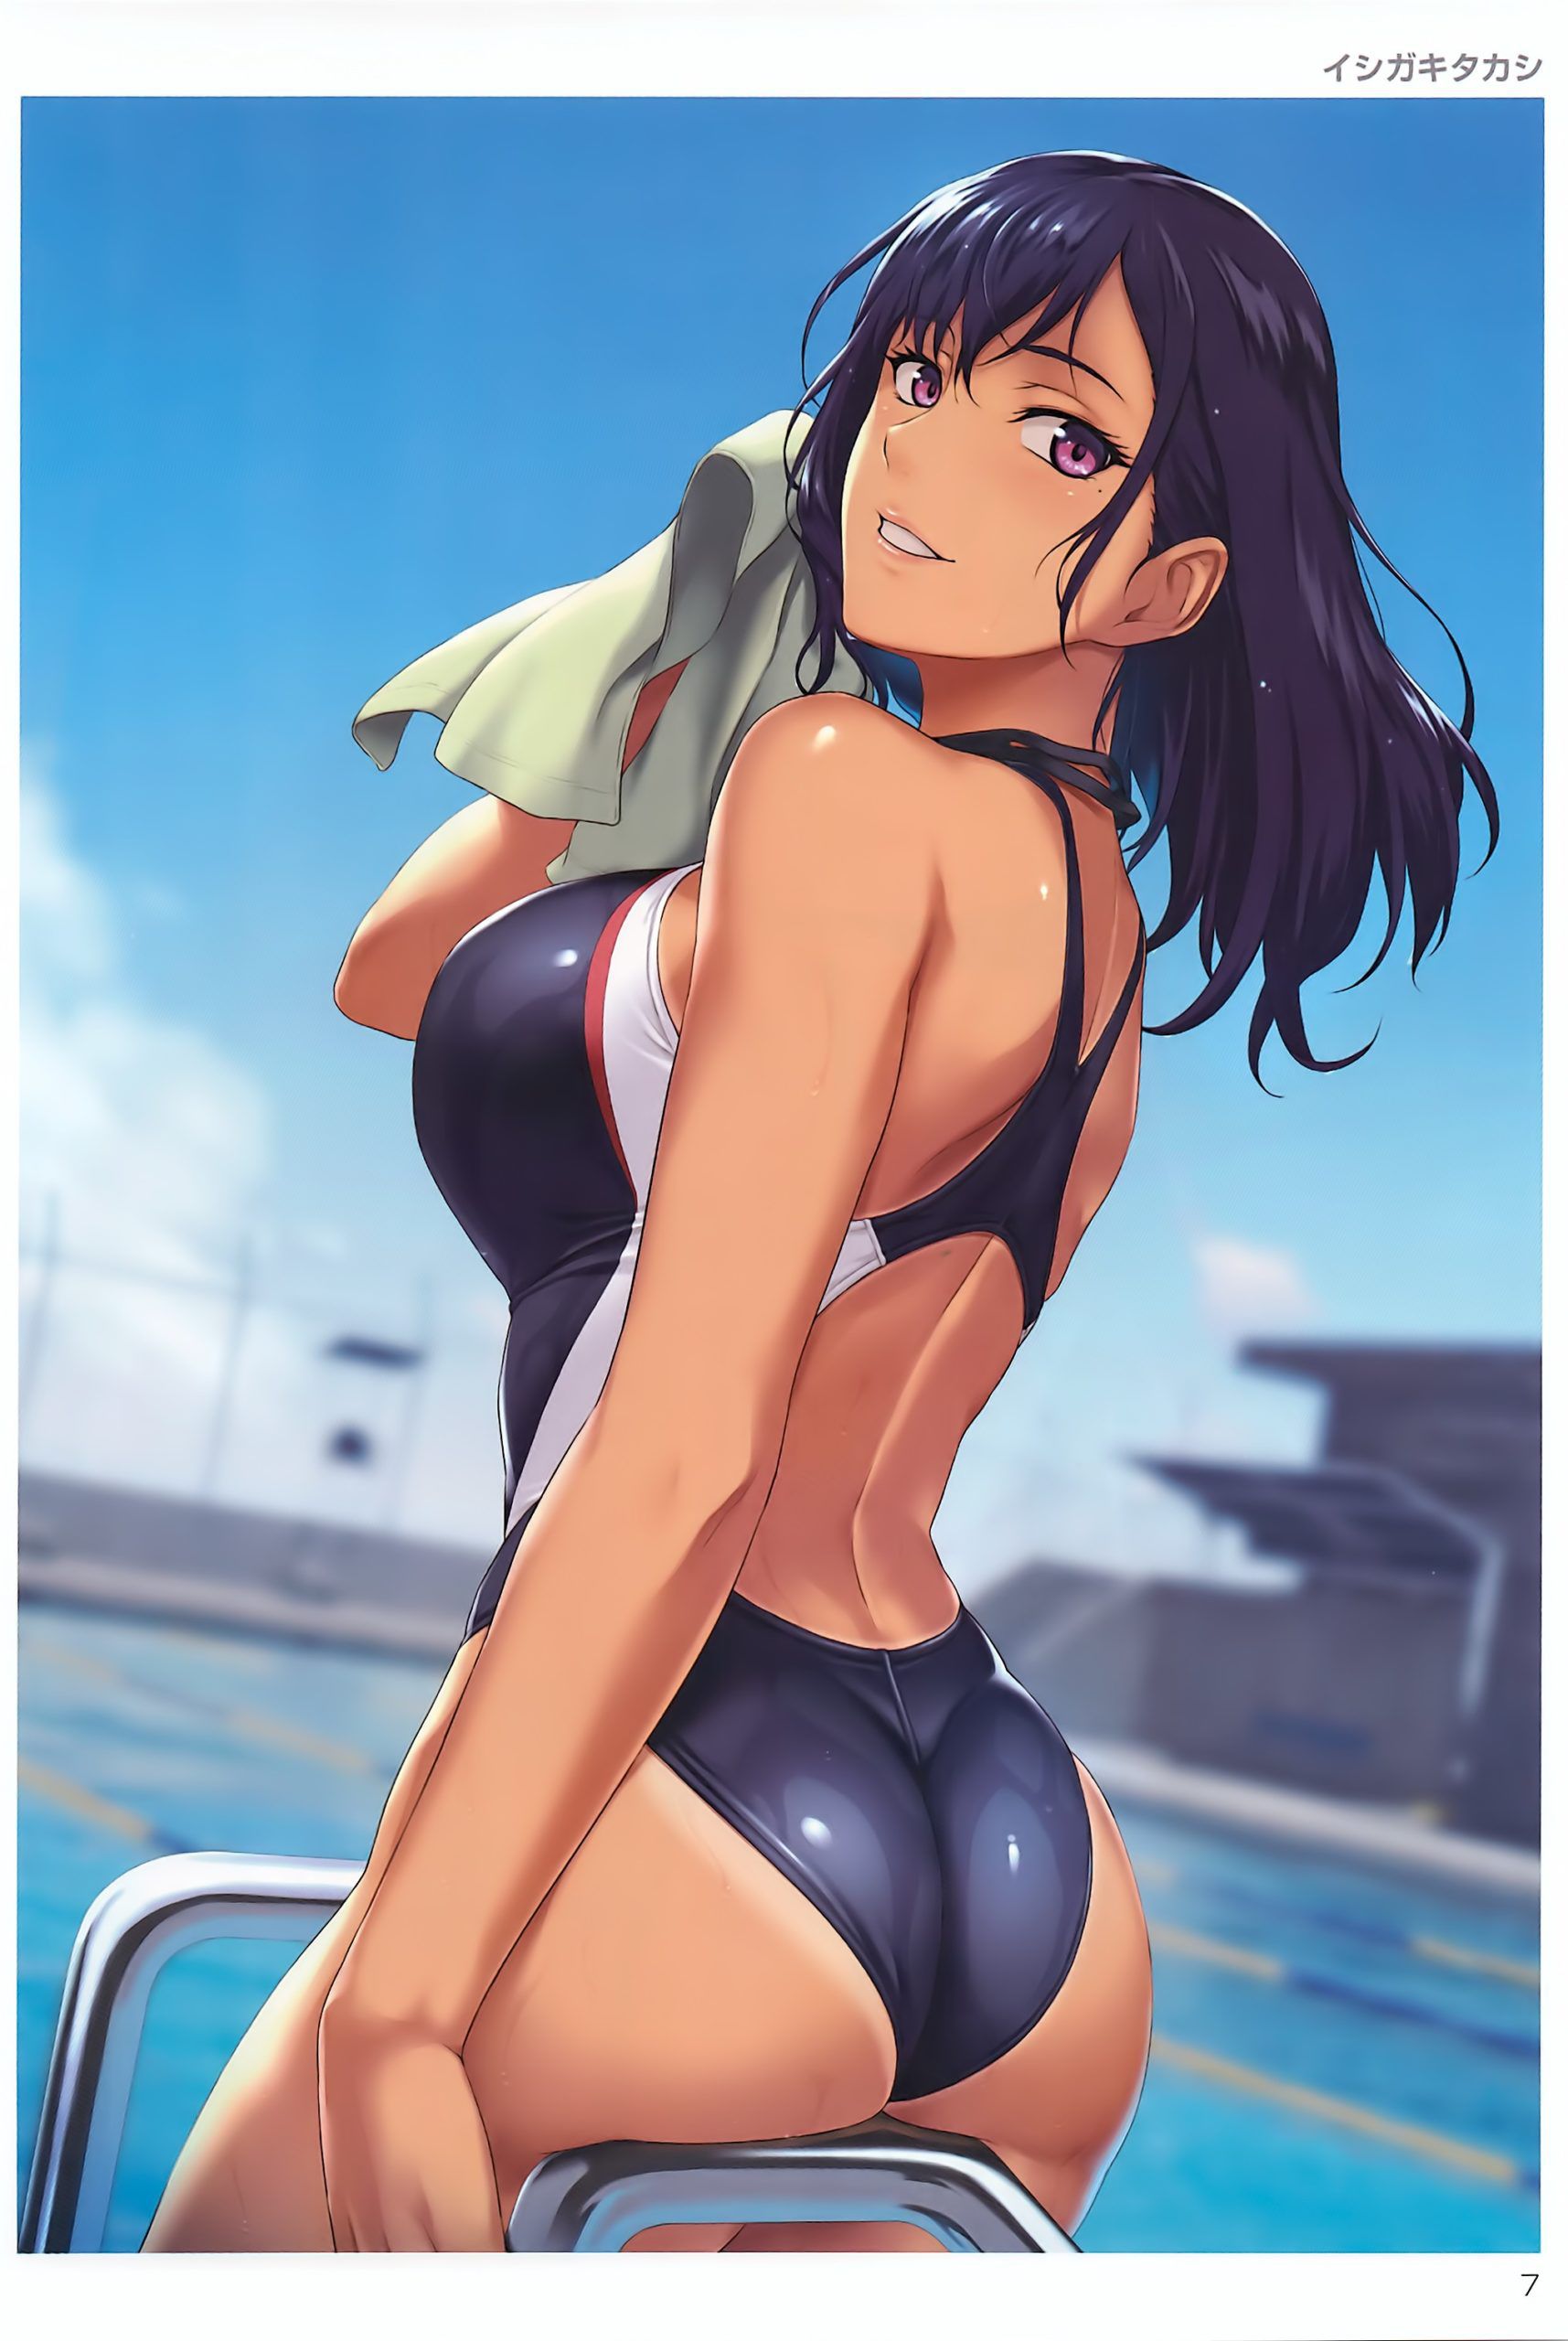 【2nd】Erotic image of a girl in a swimsuit Part 13 20